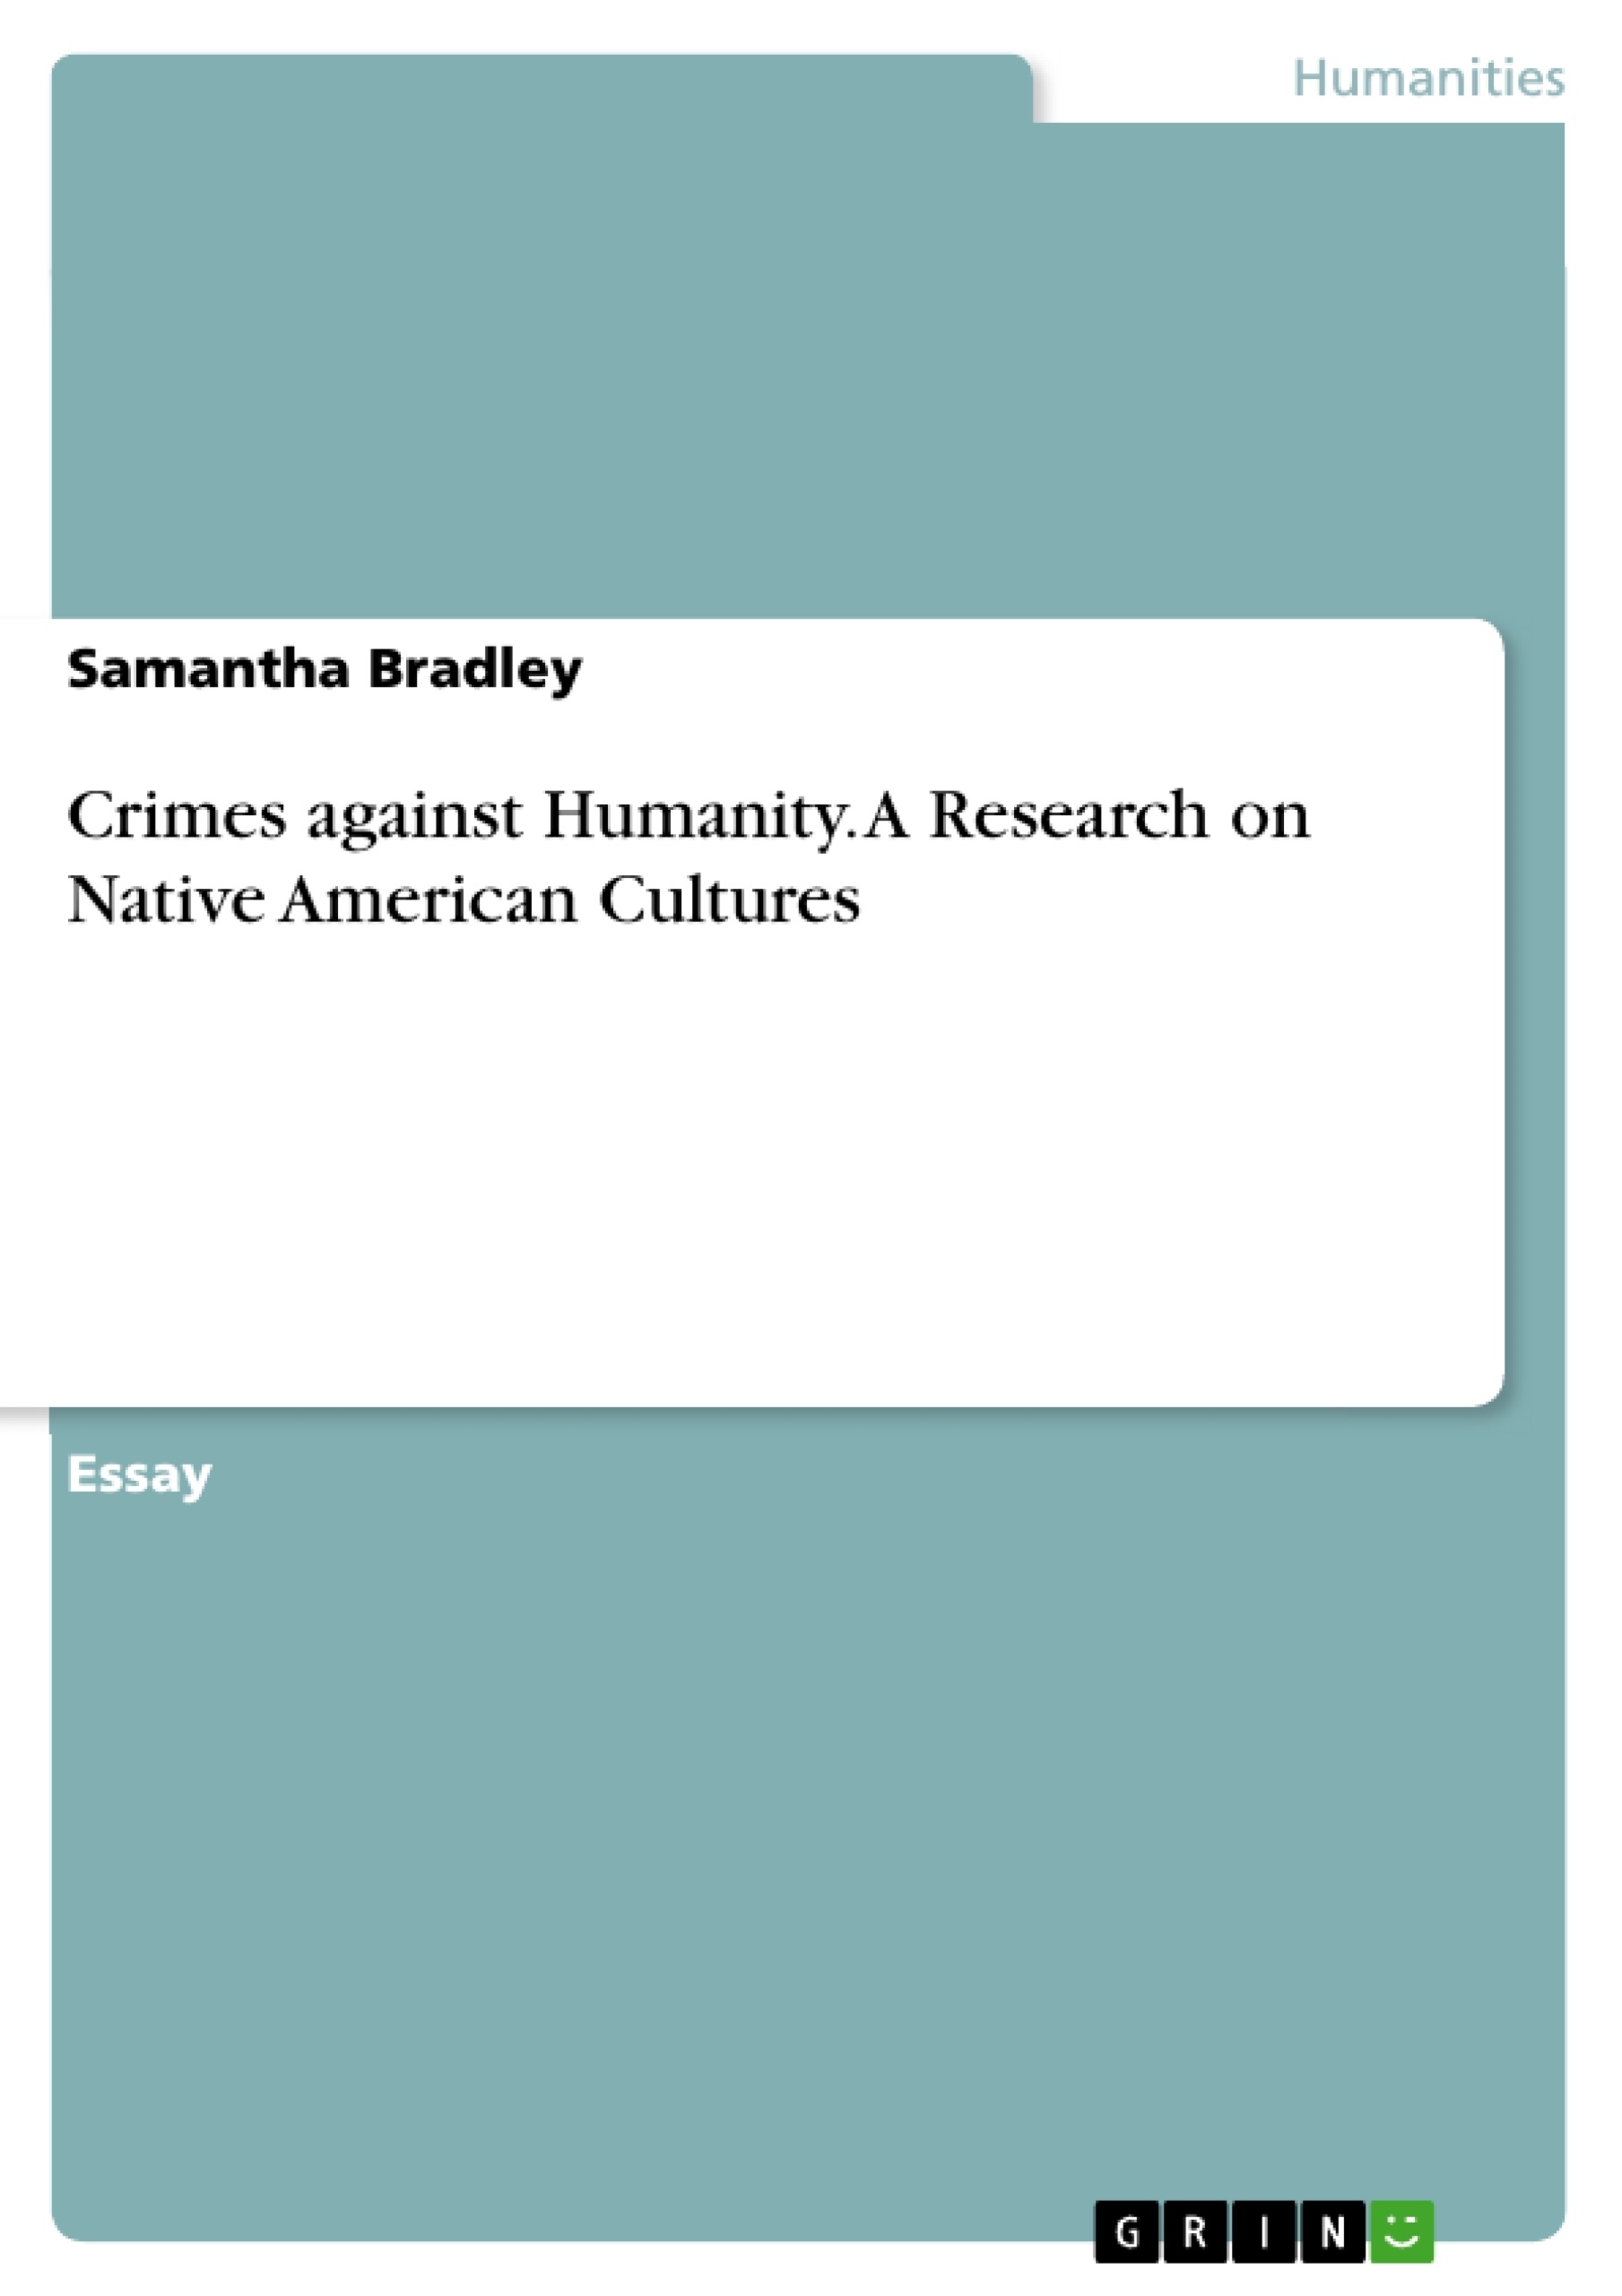 Título: Crimes against Humanity. A Research on Native American Cultures